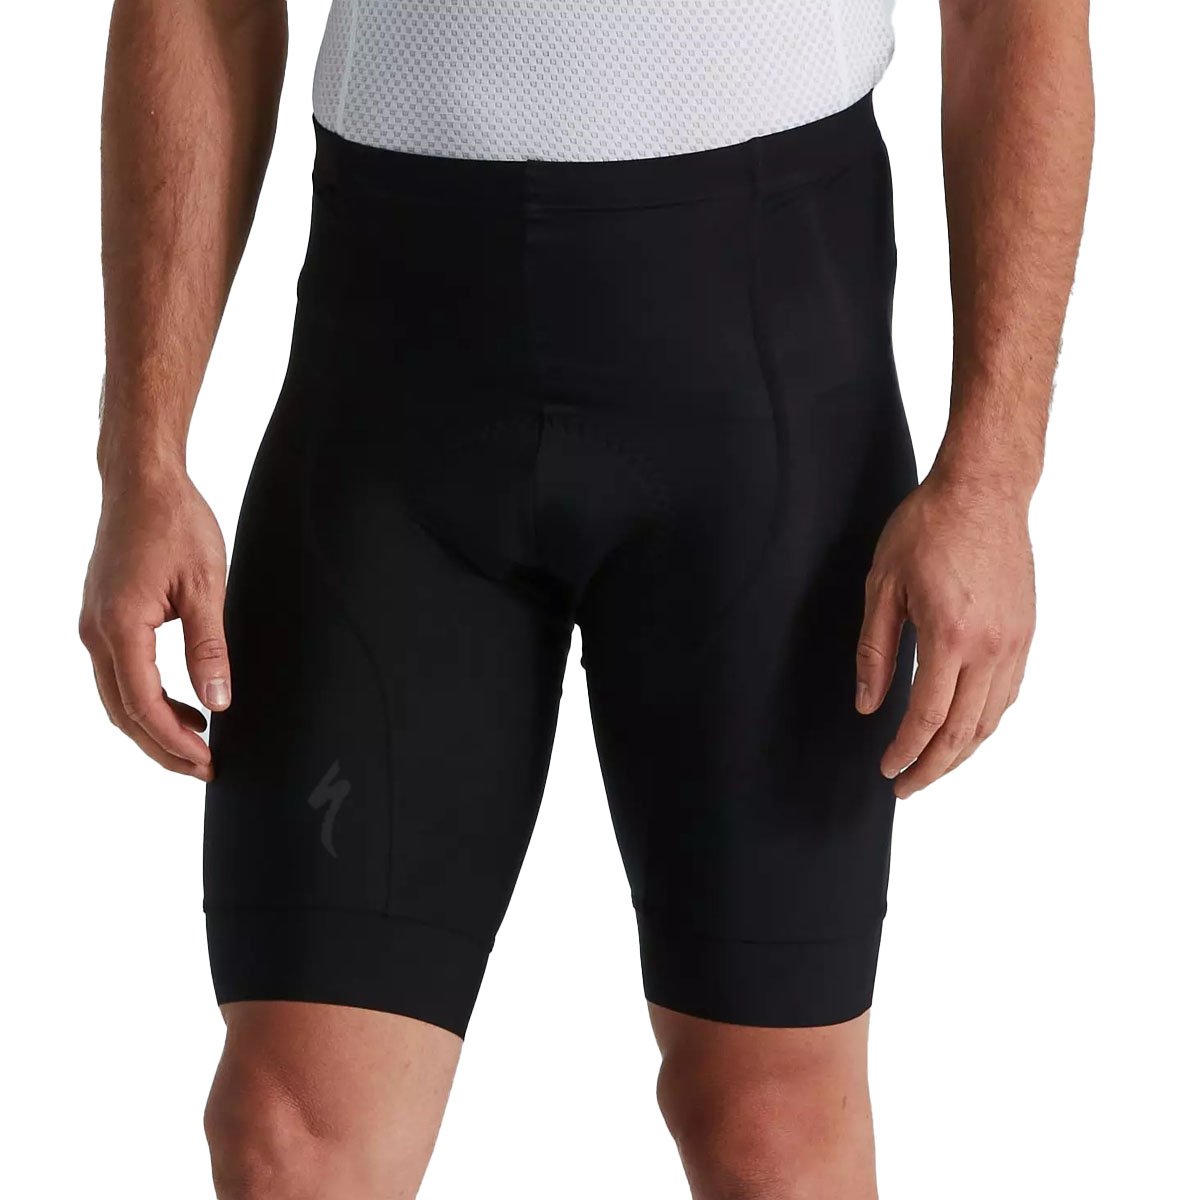 Cuissard Specialized RBX Noir Xsmall